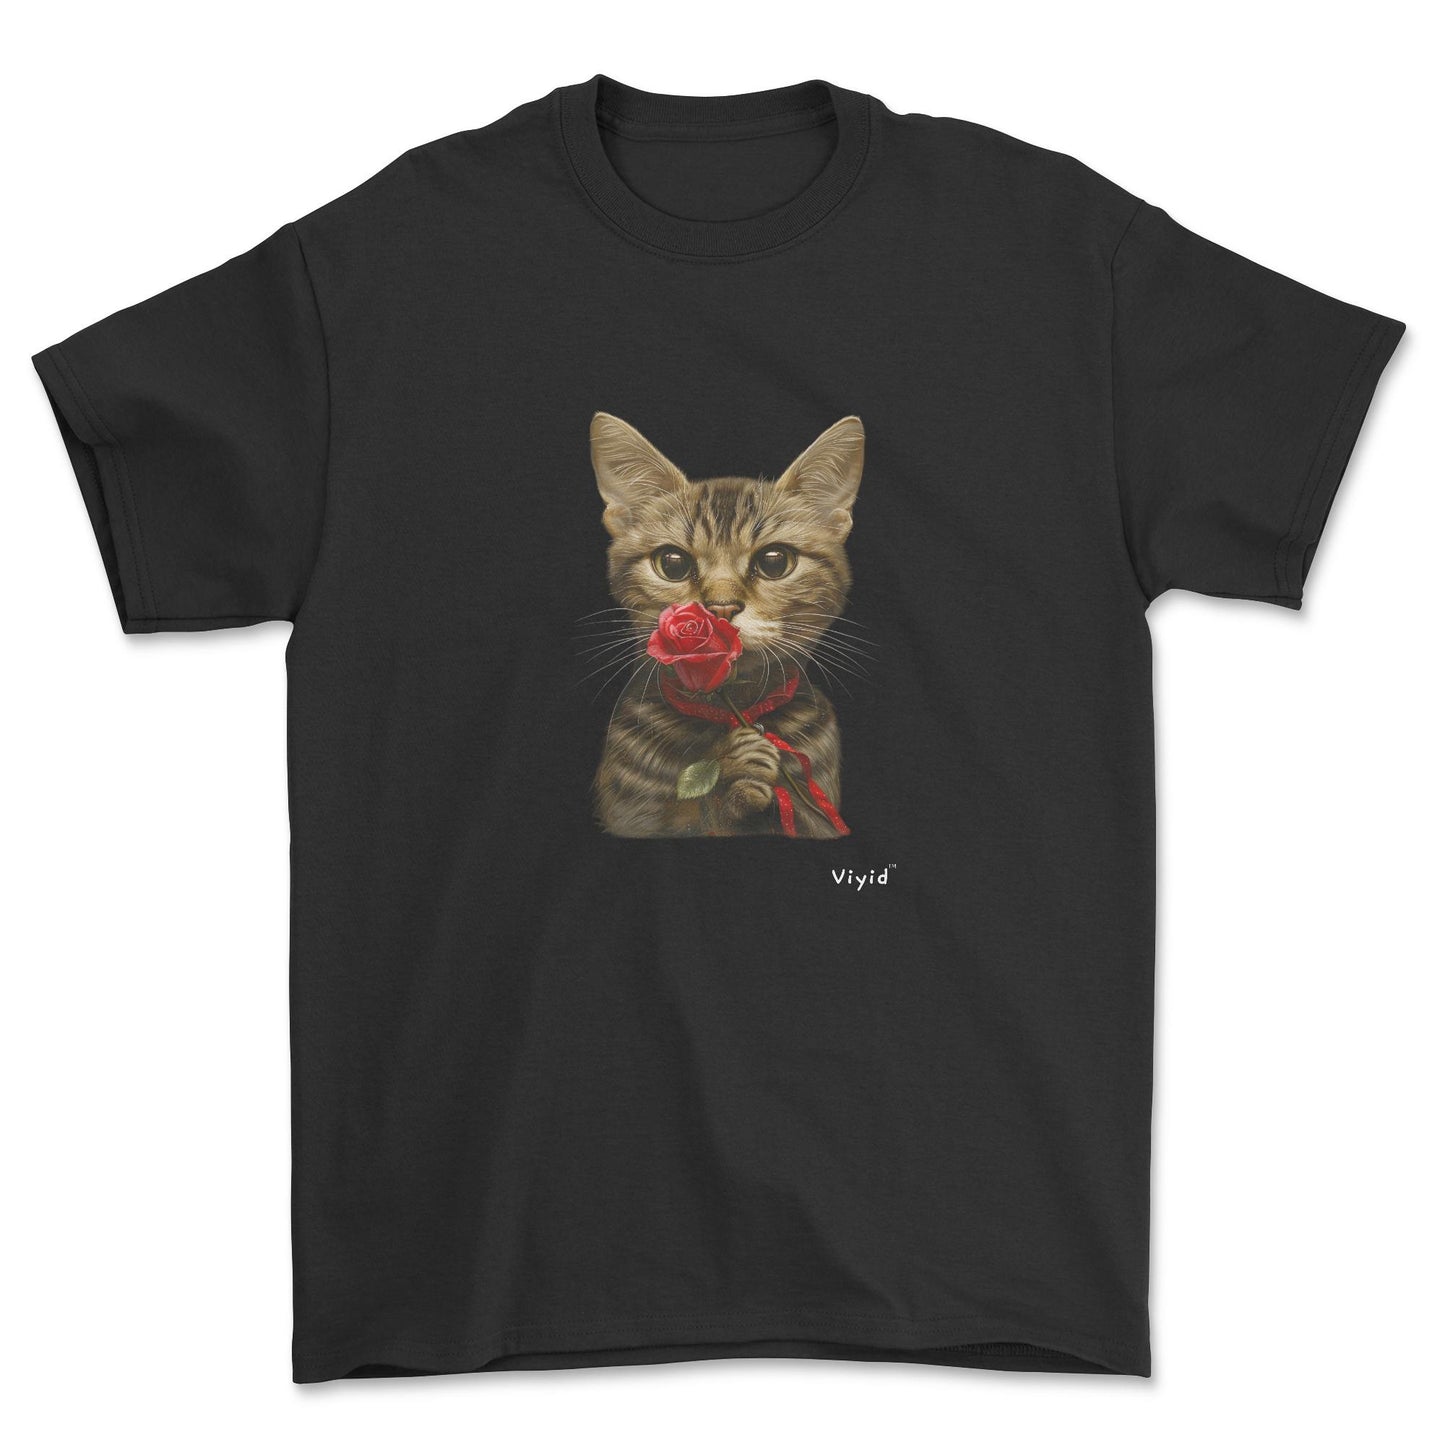 sniffing rose domestic shorthair cat adult t-shirt black